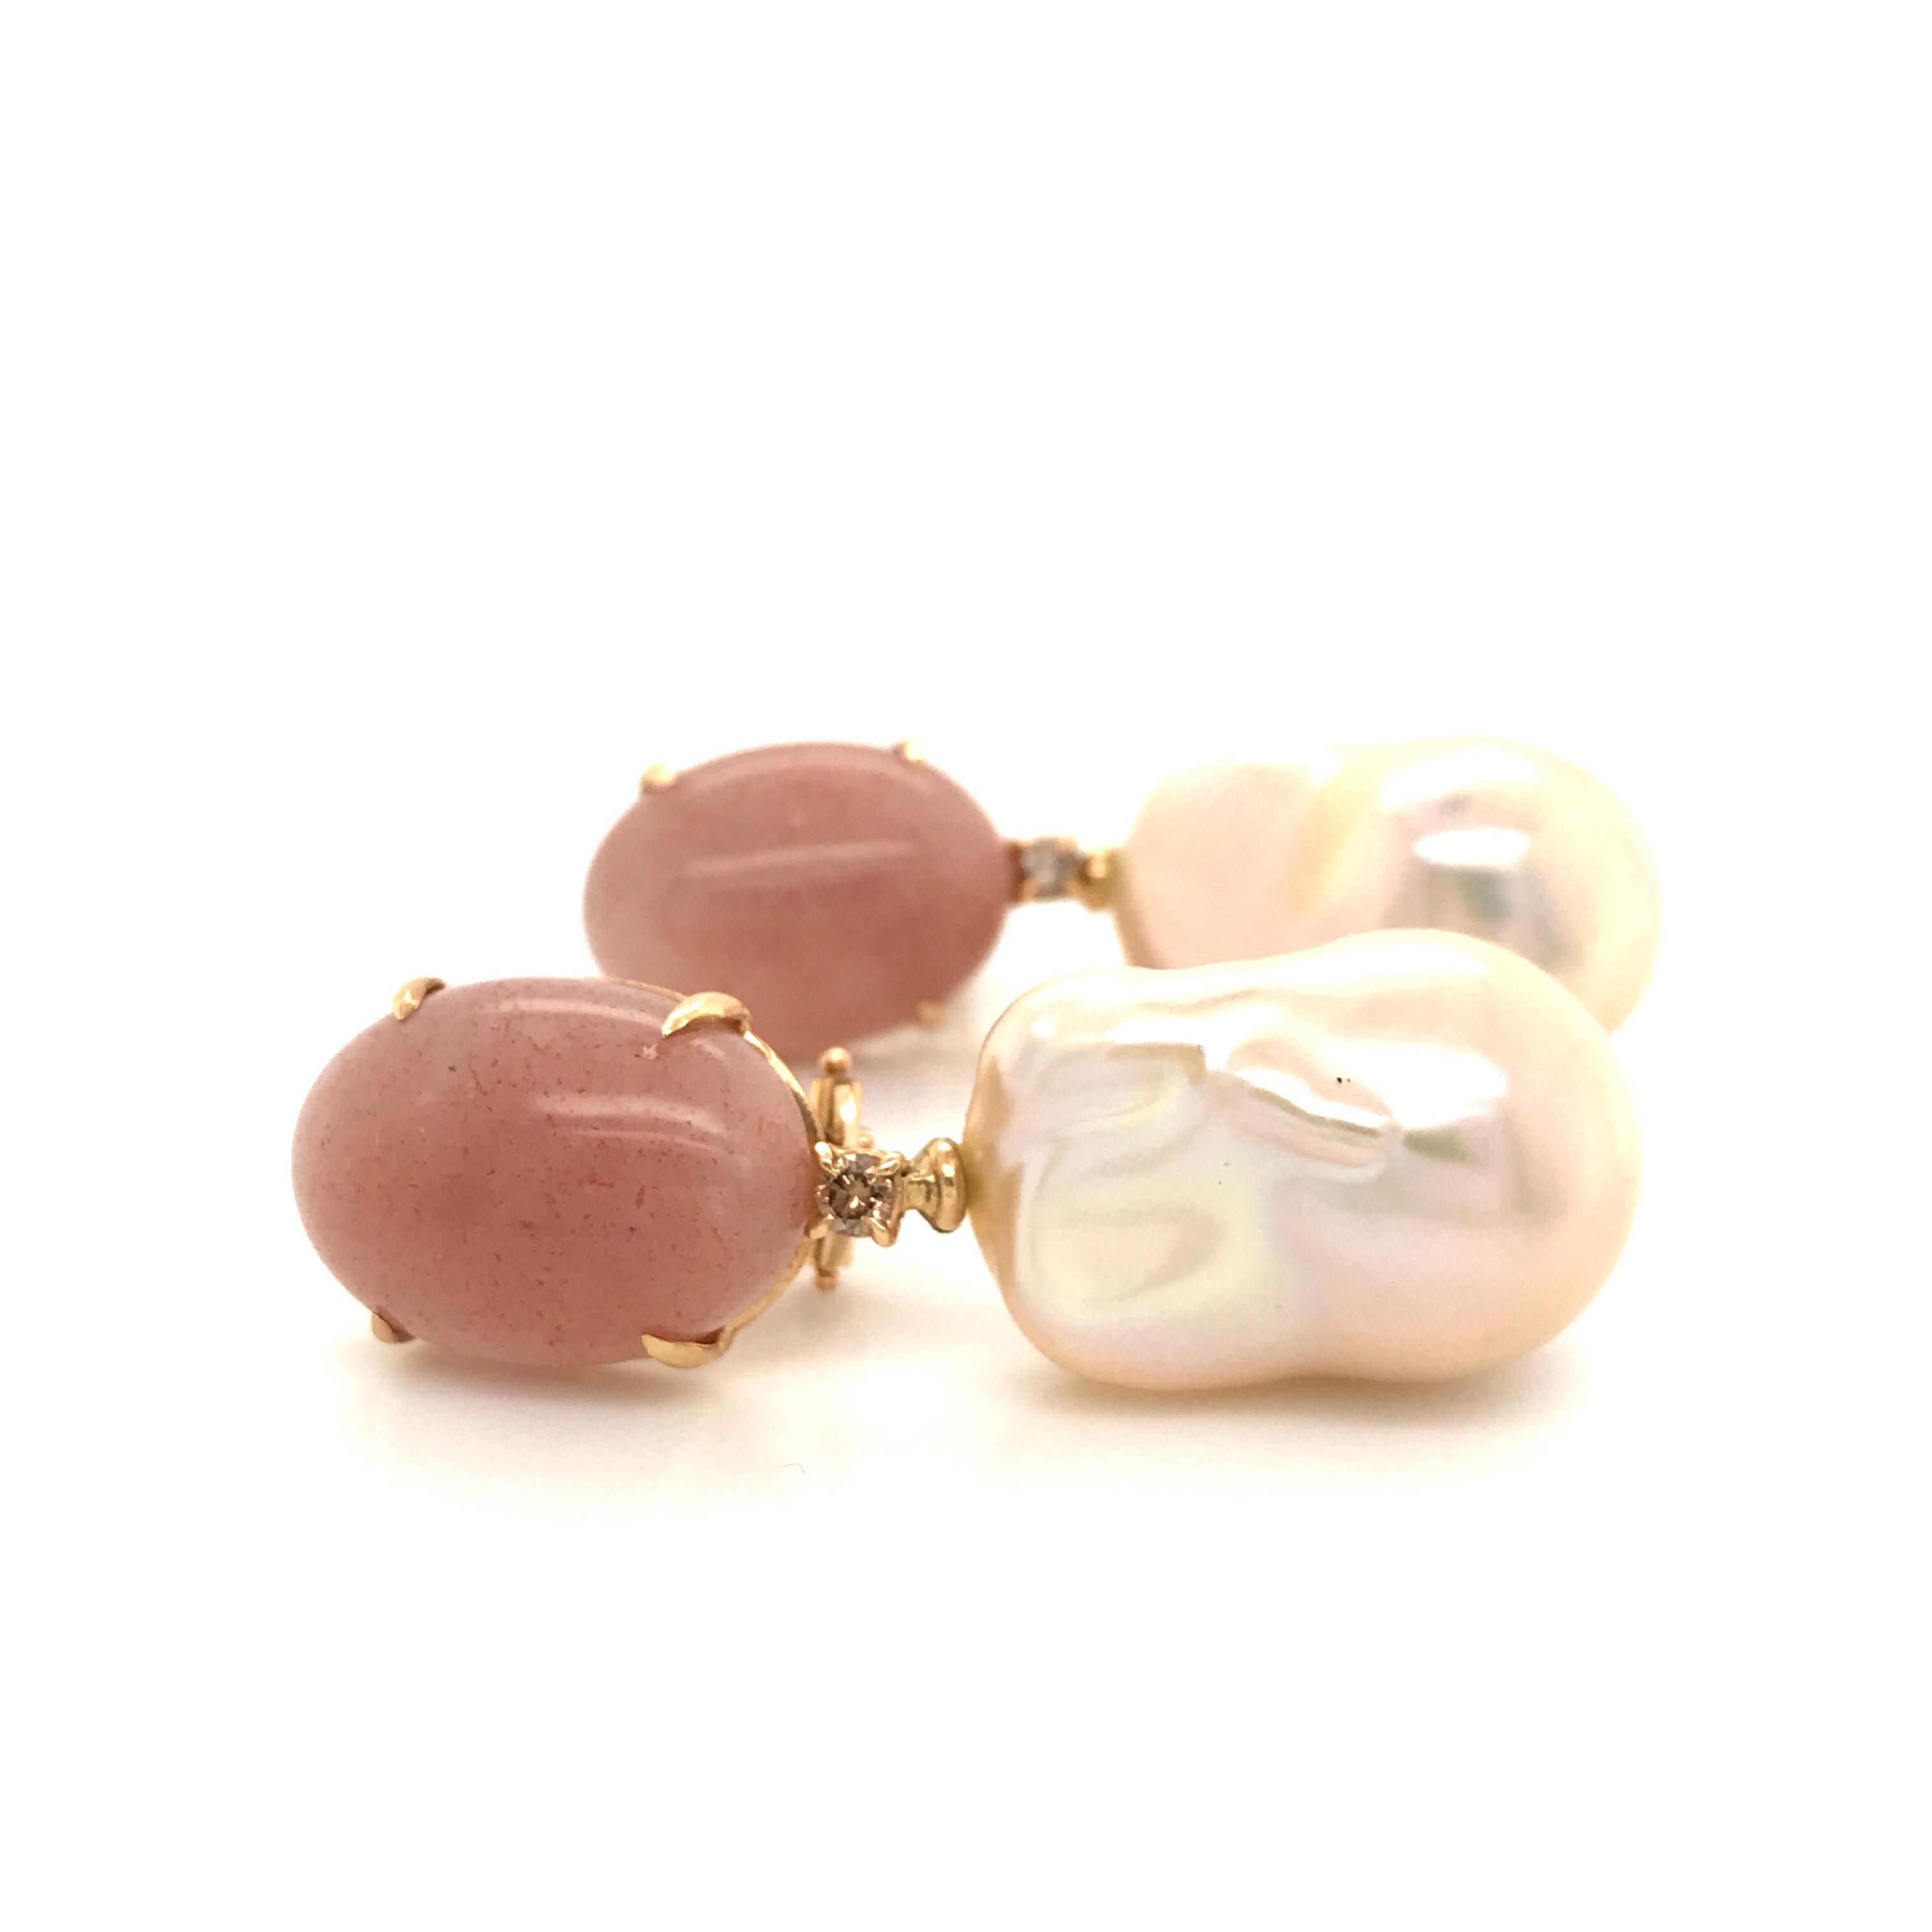 Oval Cut Peach Moonstone Baroque Pearls and Brown Diamonds on Yellow Gold Earrings